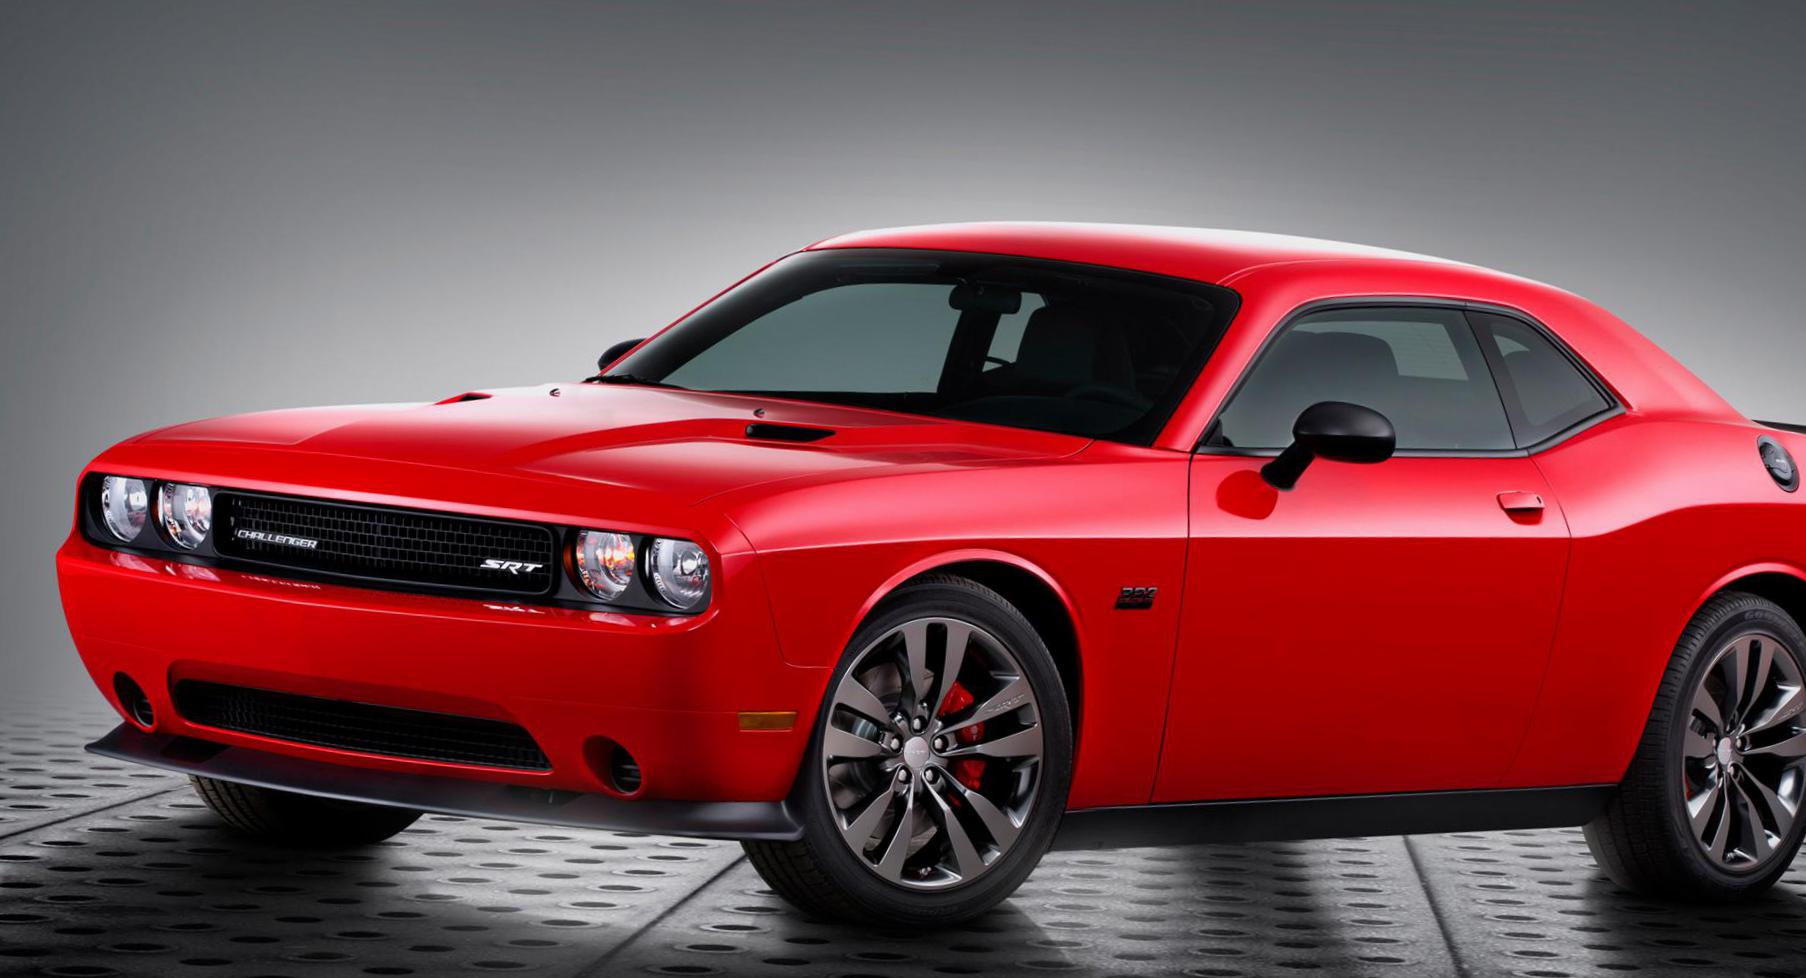 Dodge Challenger price coupe